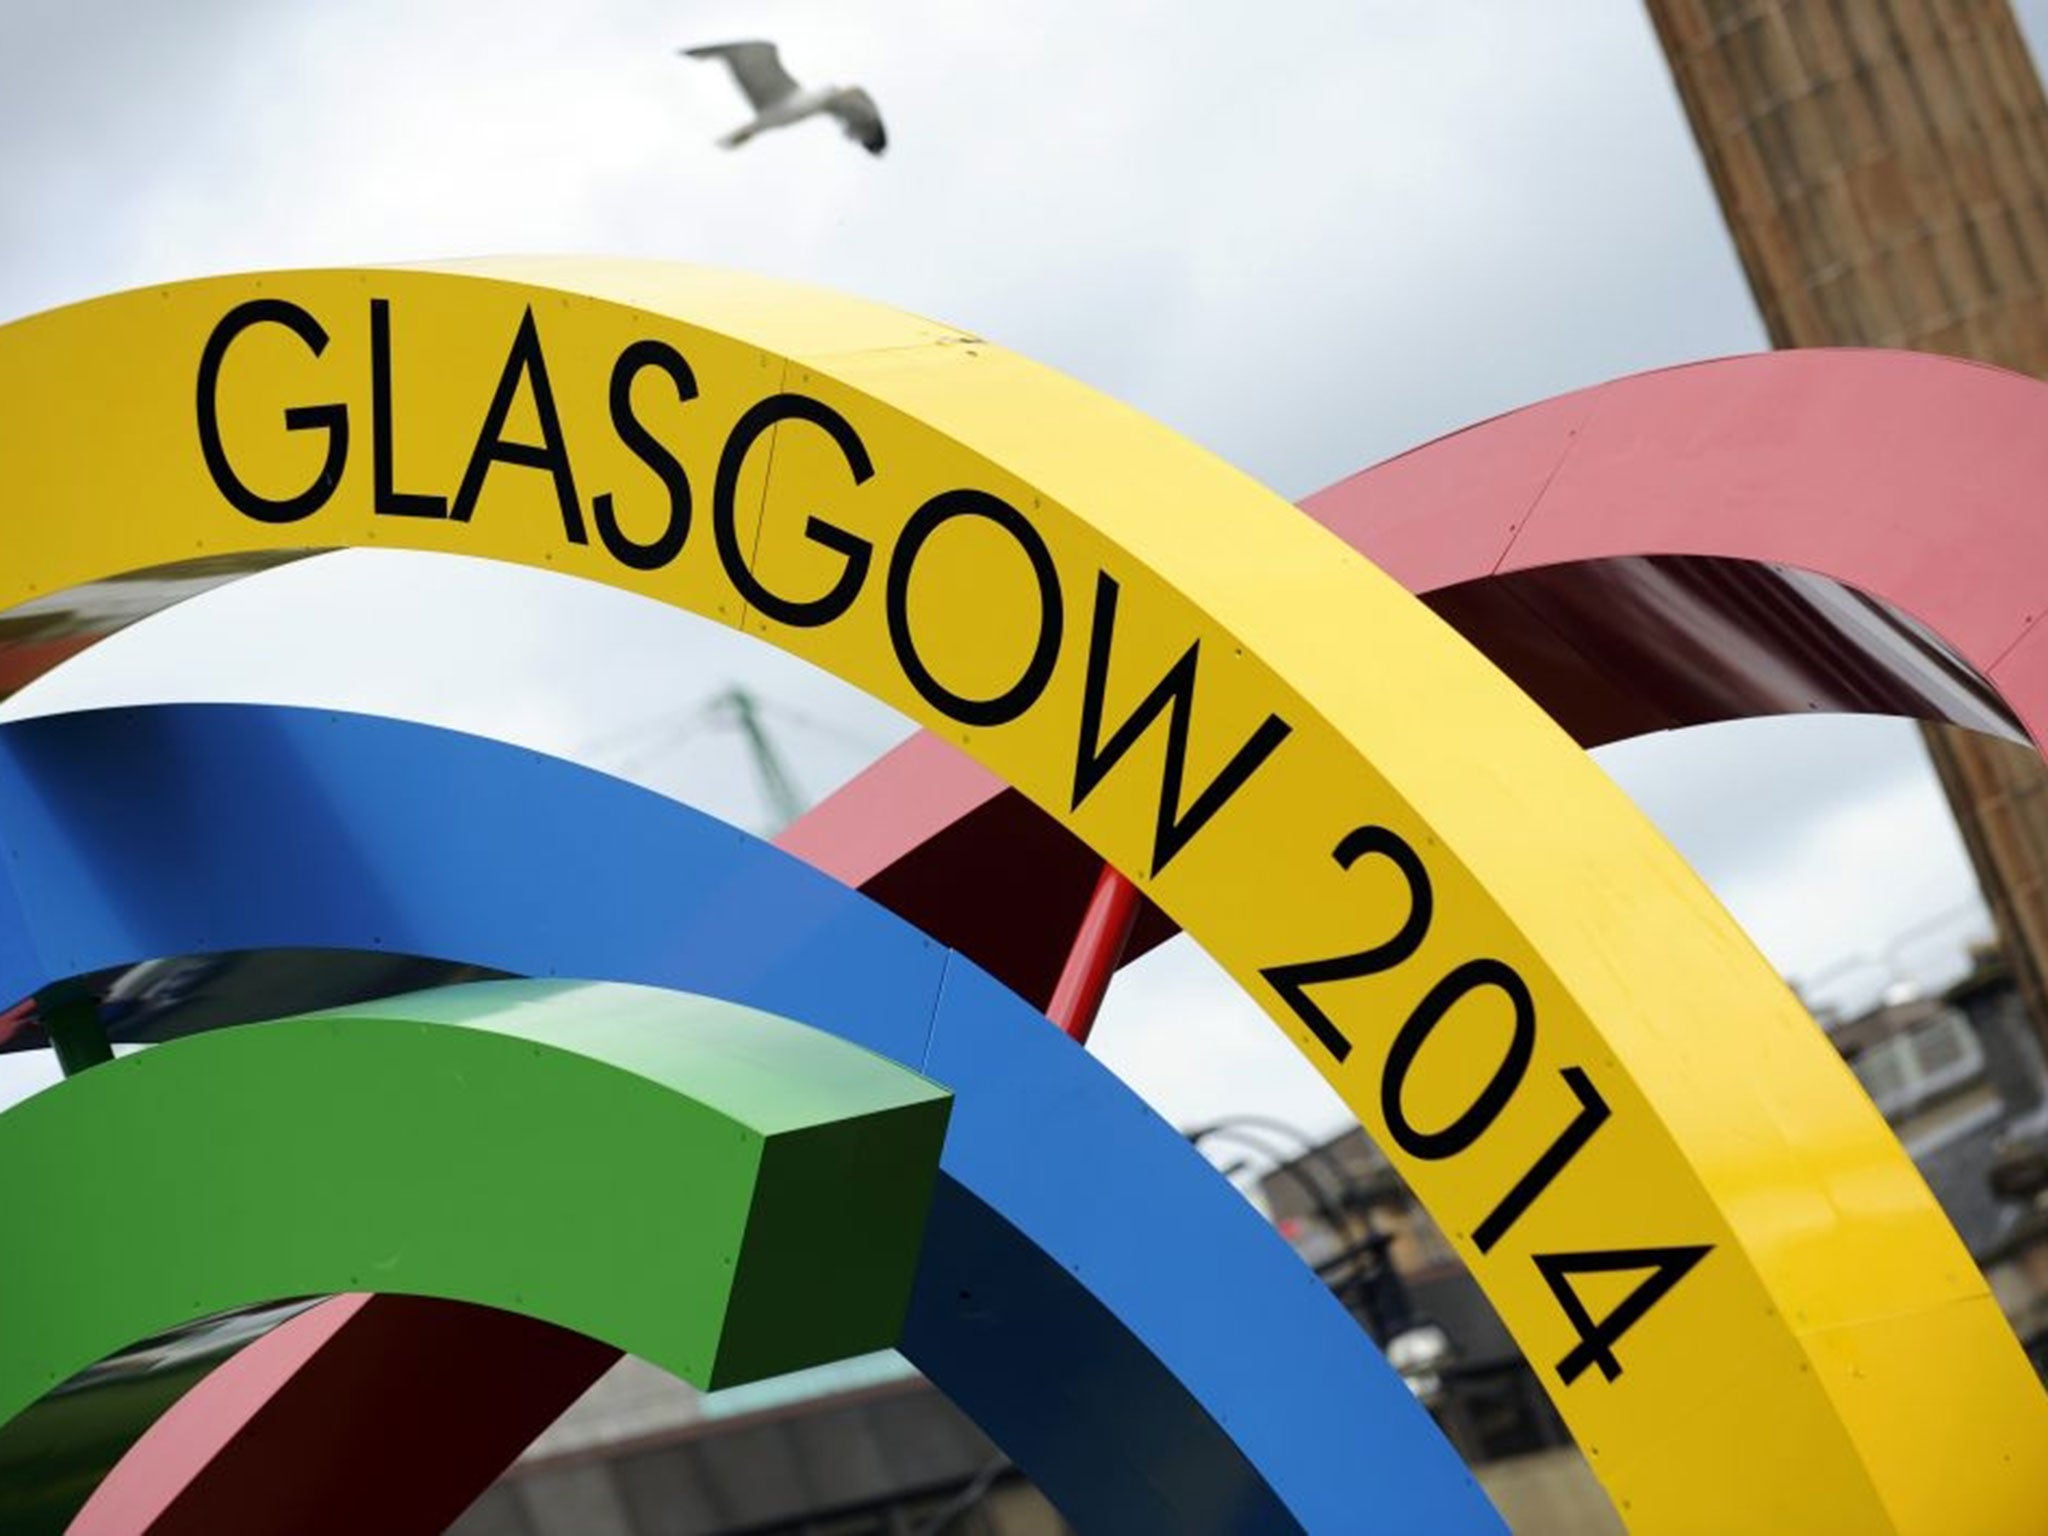 A sculpture known as 'the Big G' is pictured in Glasgow in Scotland. The Commonwealth Games begin in Glasgow on July 23, 2014.